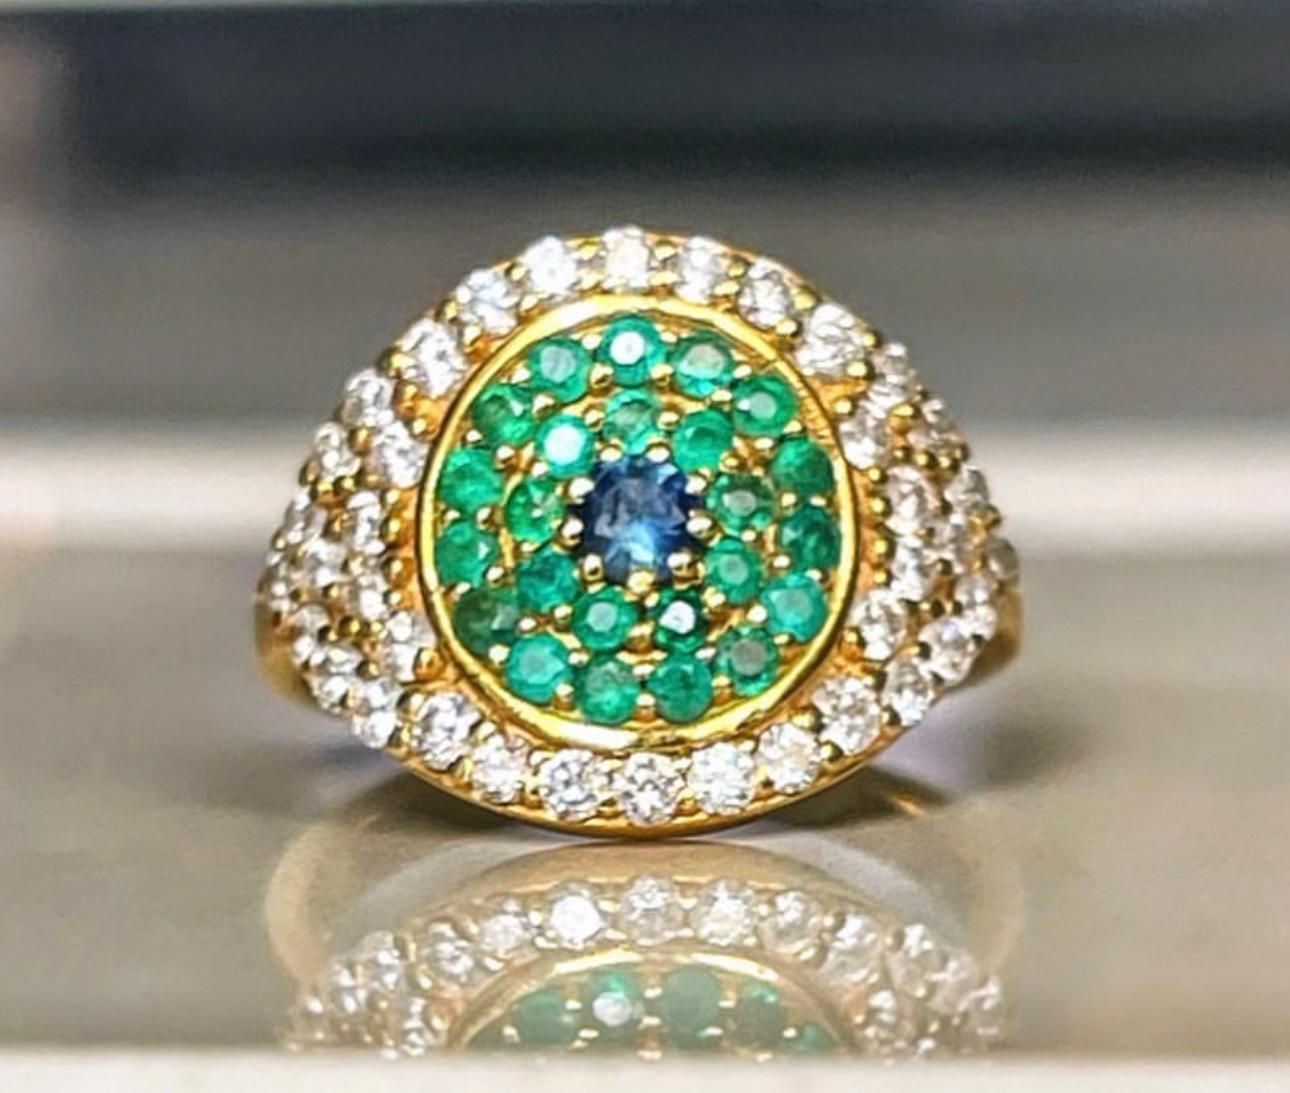 For Sale:  Large Eye Ring with Diamonds and Emeralds in Gold in stock 5